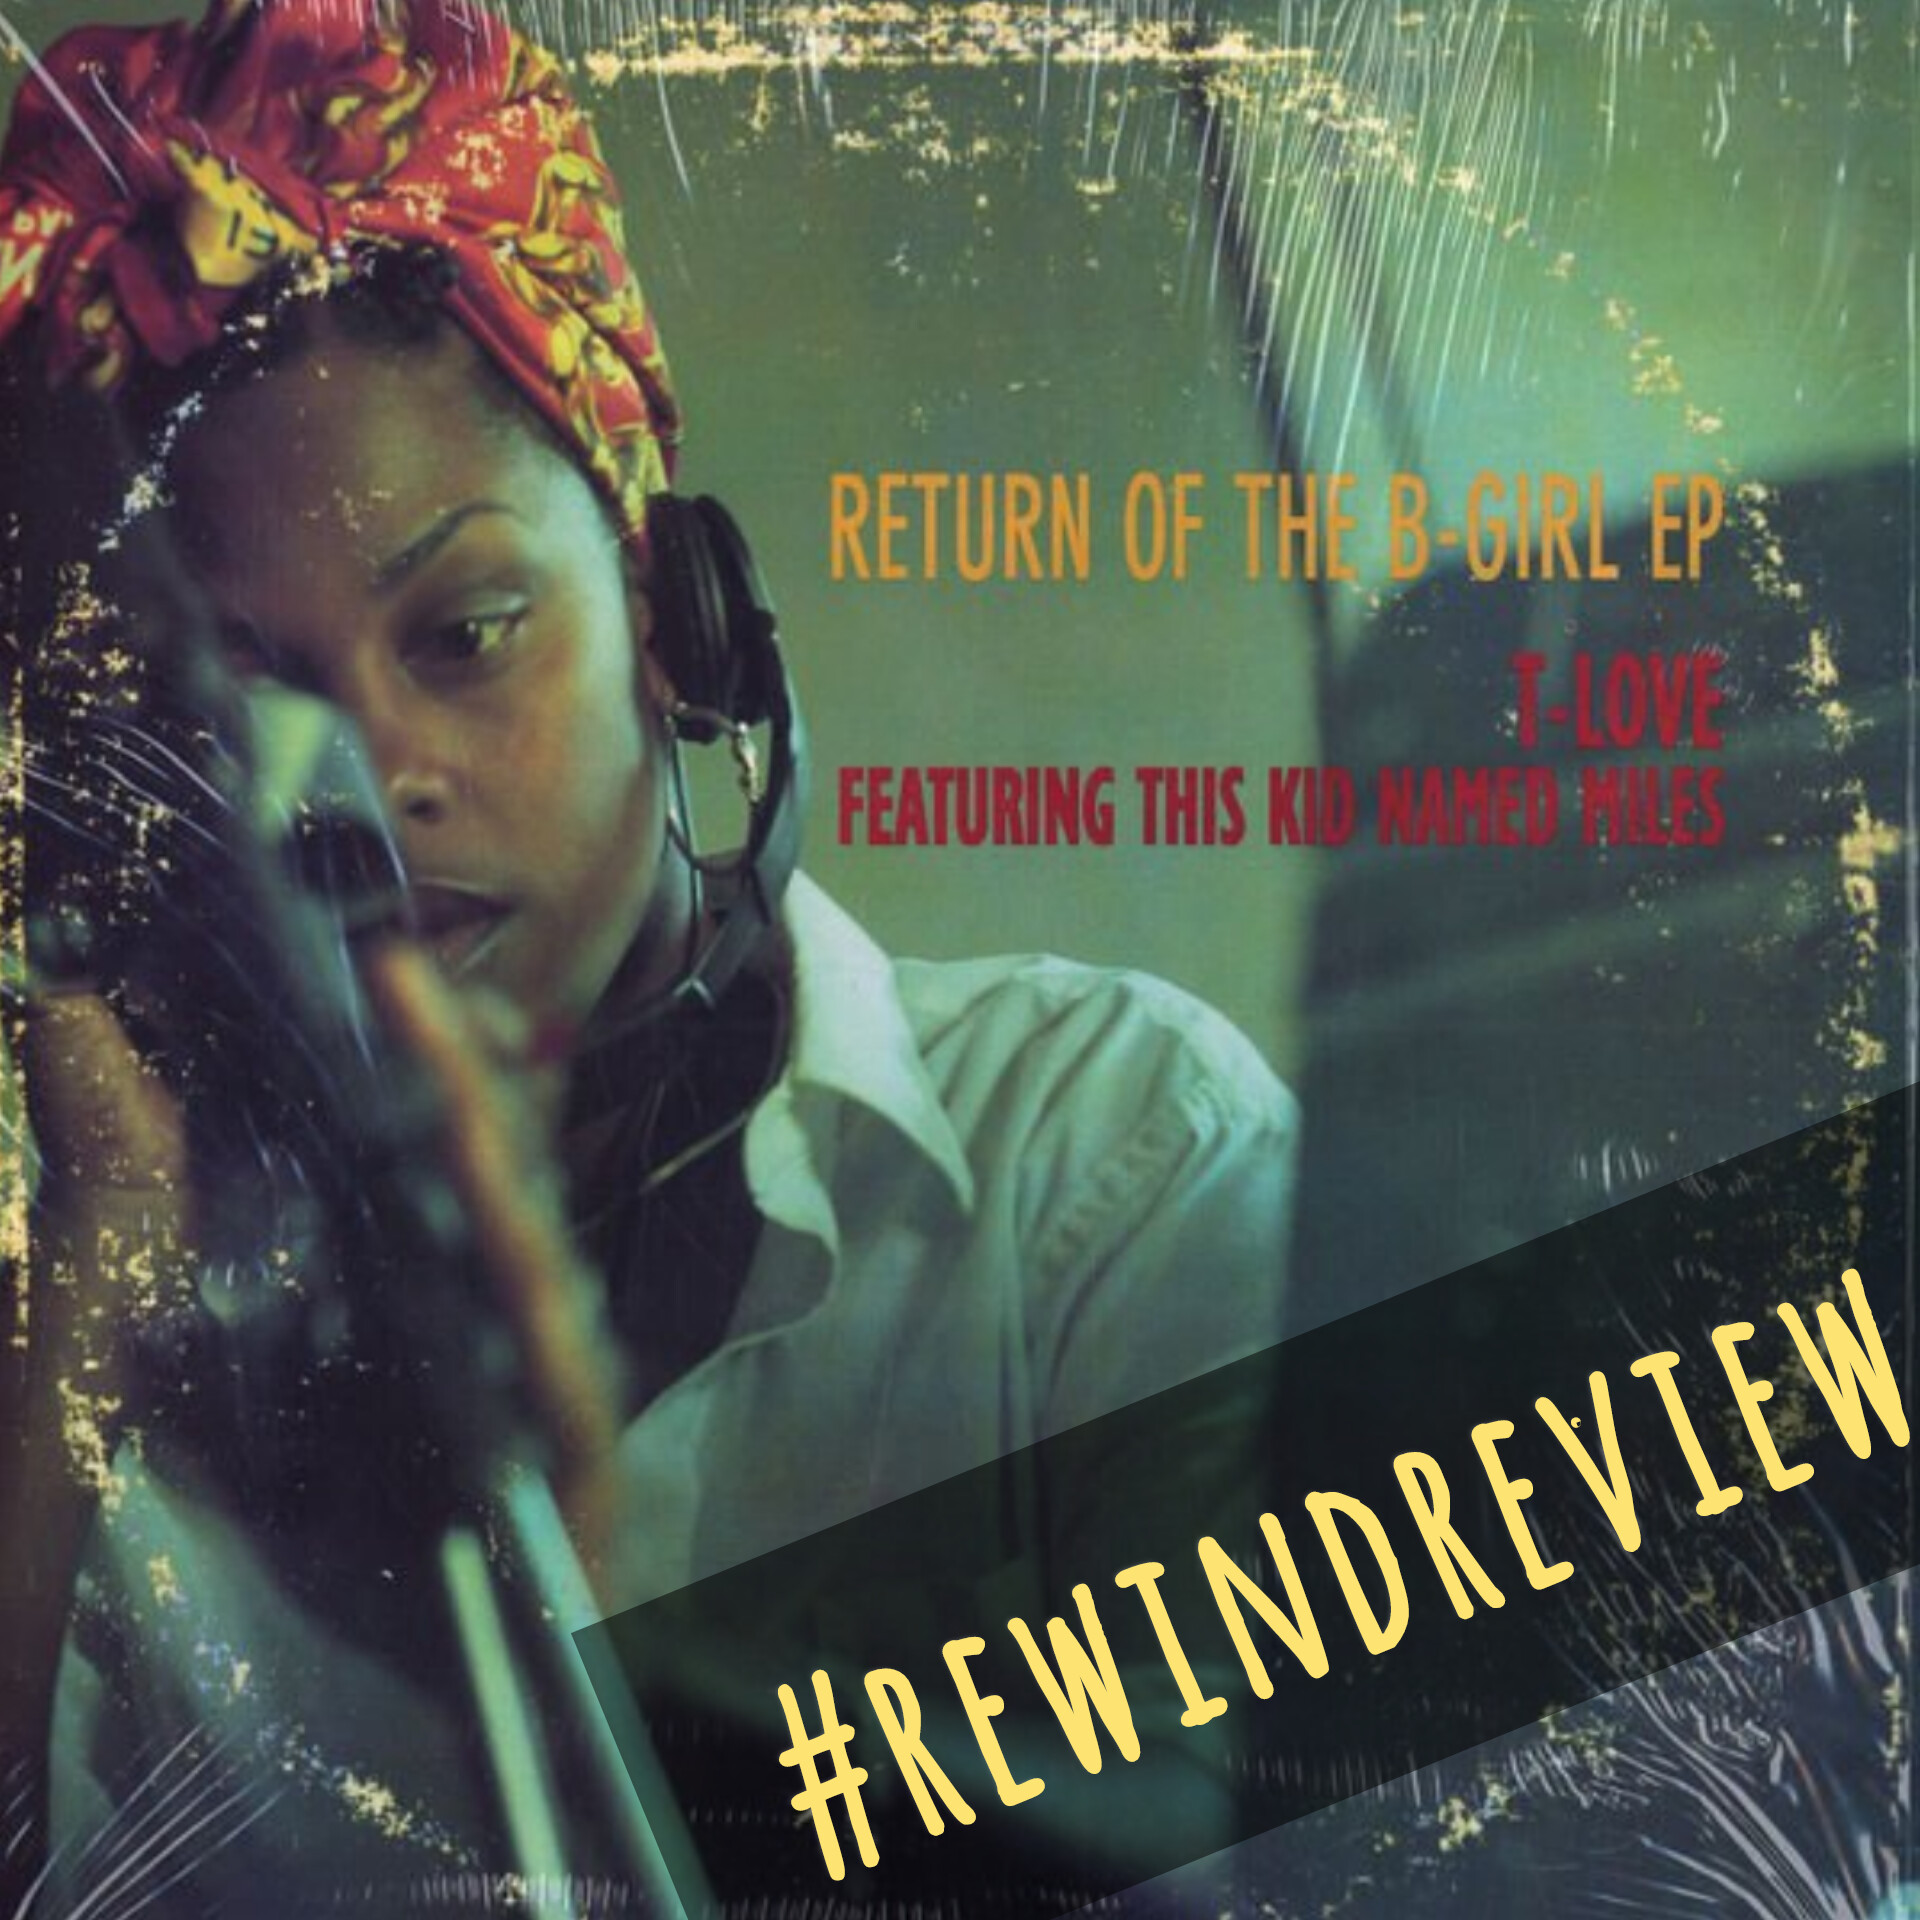 #rewindreview: T-Love ‘Return Of The B-Girl’ EP 1998